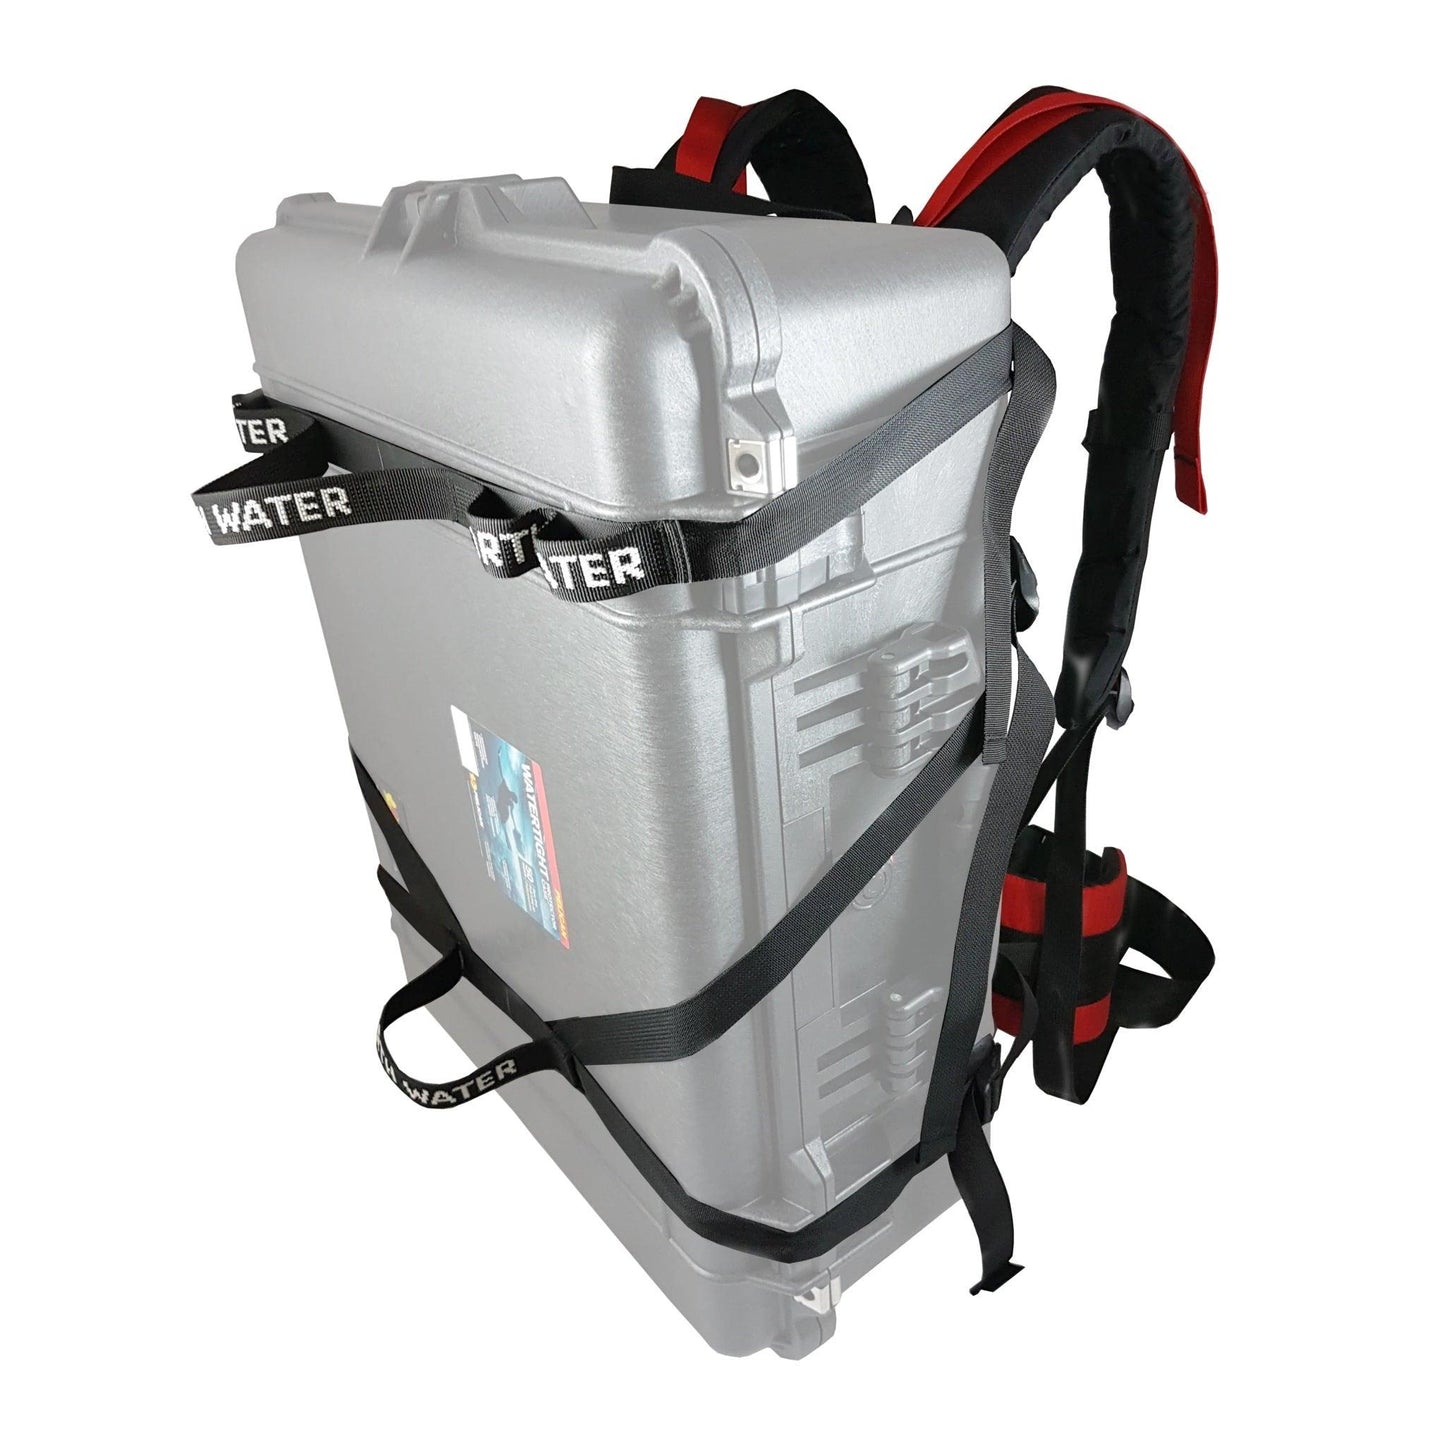 North Water Quick Haul Harness